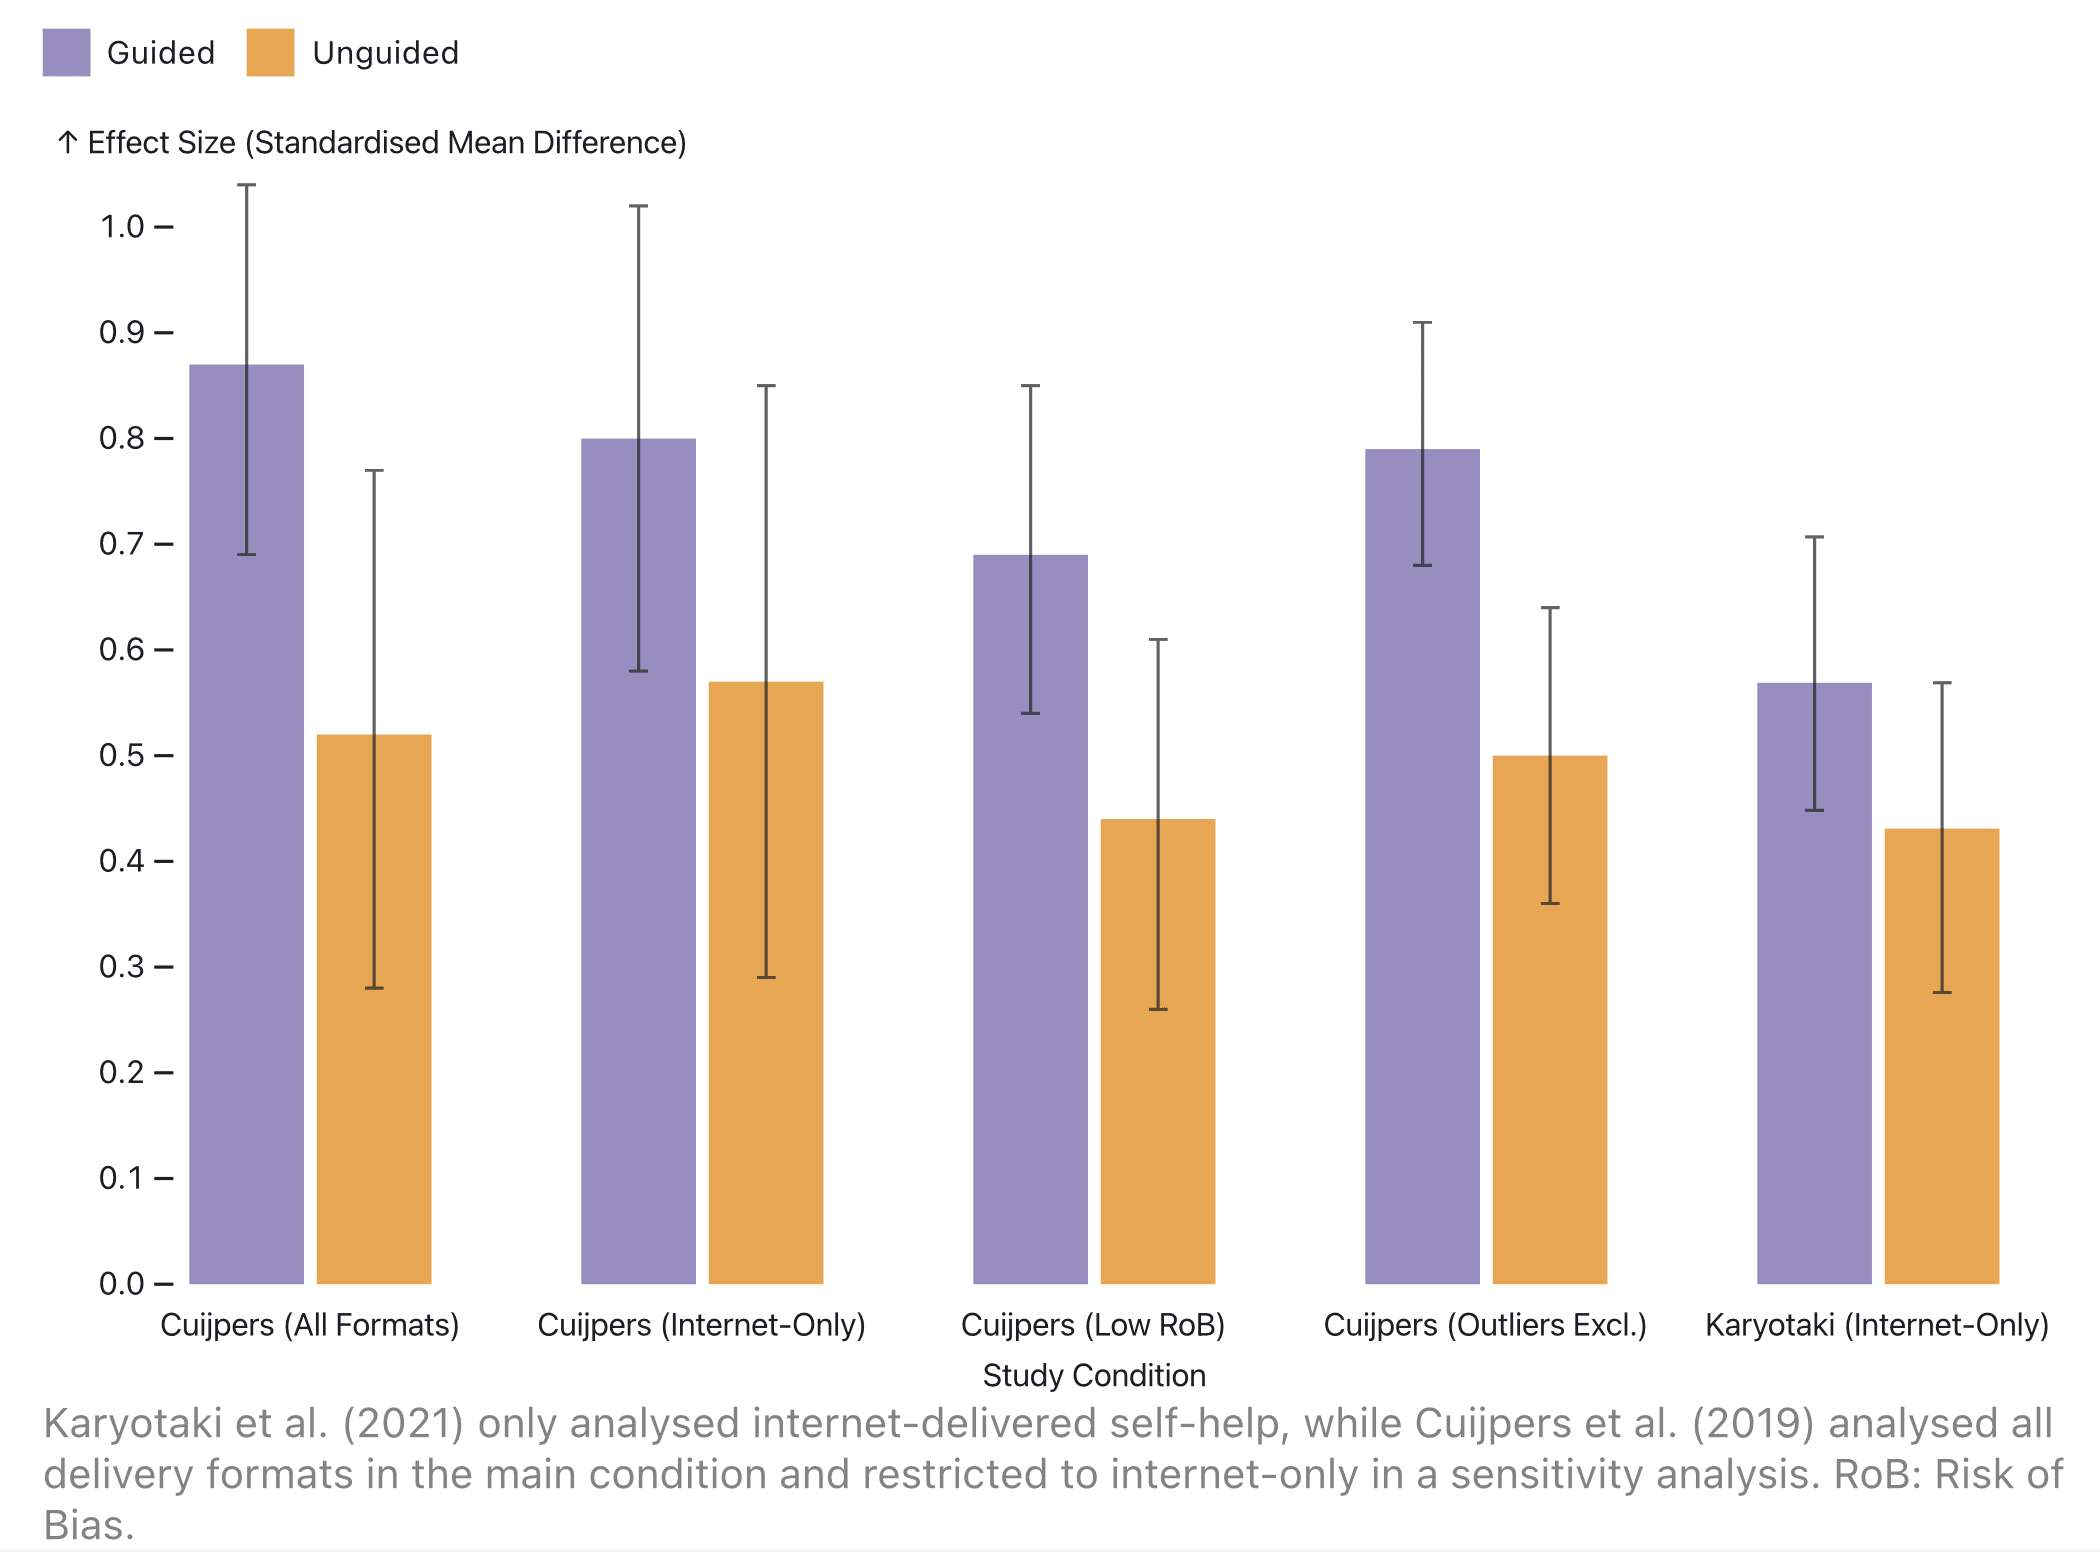 Bar charts showing the above differences between guided and unguided self-help across different studies.